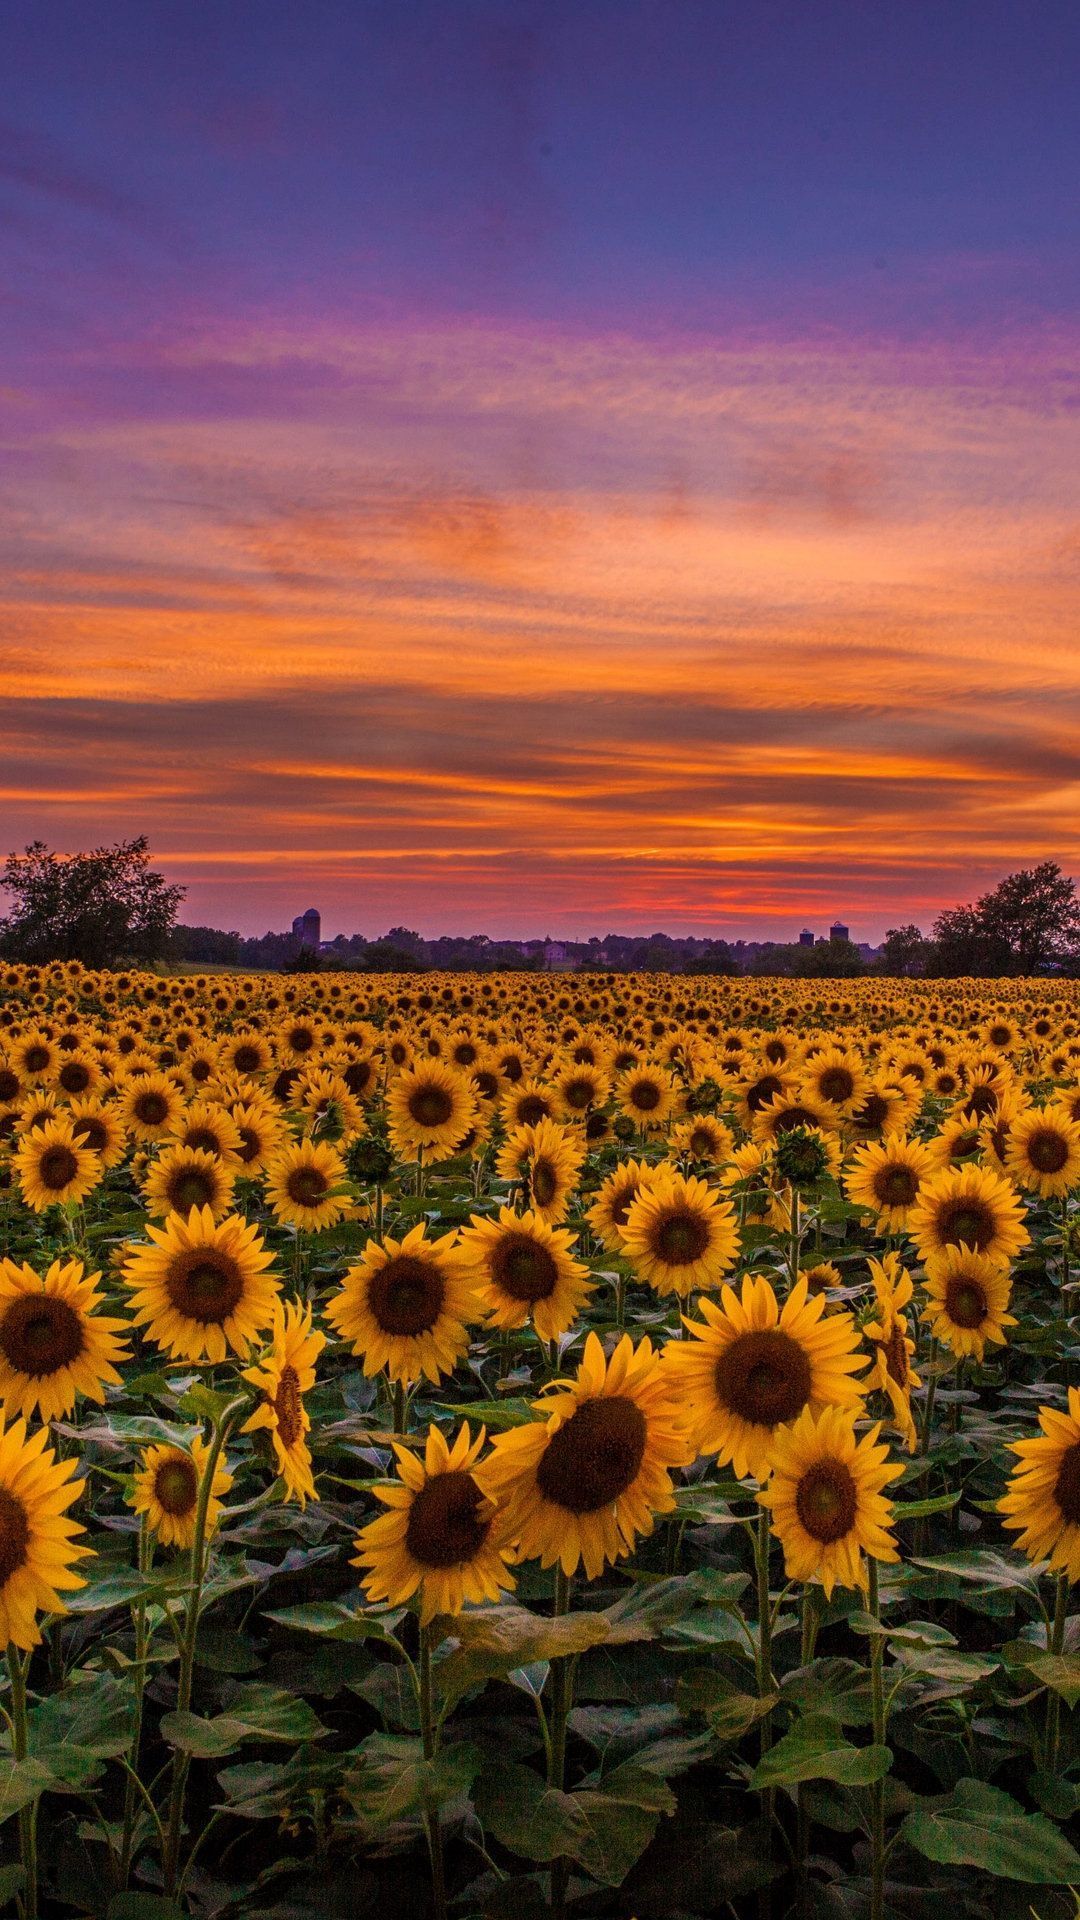 Sunflowers Field At Sunset Wallpapers - Wallpaper Cave